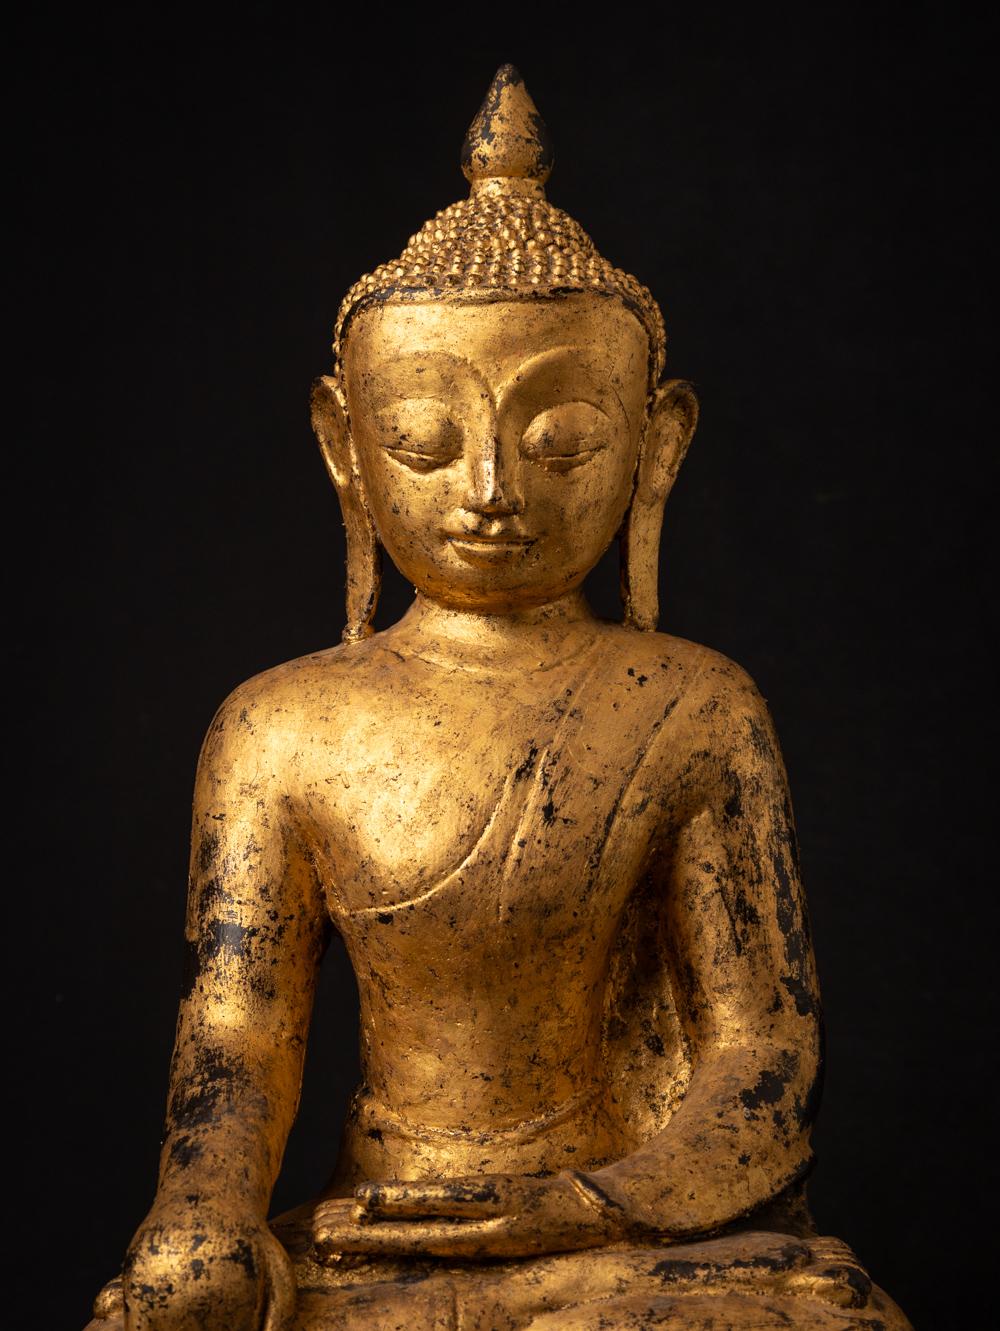 This 18th century Special antique bronze Burmese Buddha is a truly unique and special collectible piece. Standing at 58 cm high, 36 cm wide, and 24.8 cm deep, it is made of bronze and it has been gilded with 24 krt gold leaf, adding to its beauty